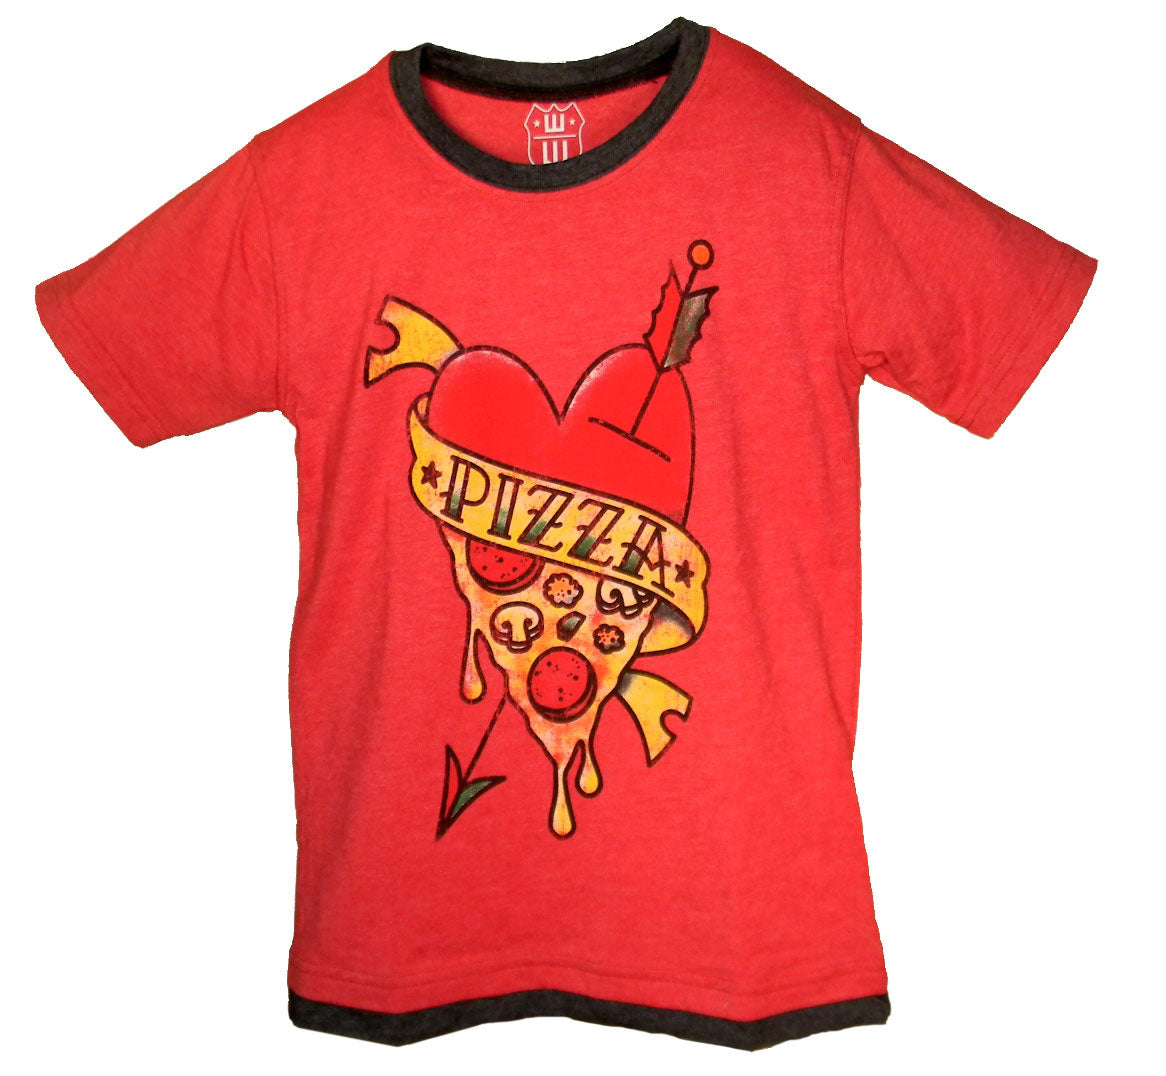 Boys' Pizza Shirt by Wes and Willy